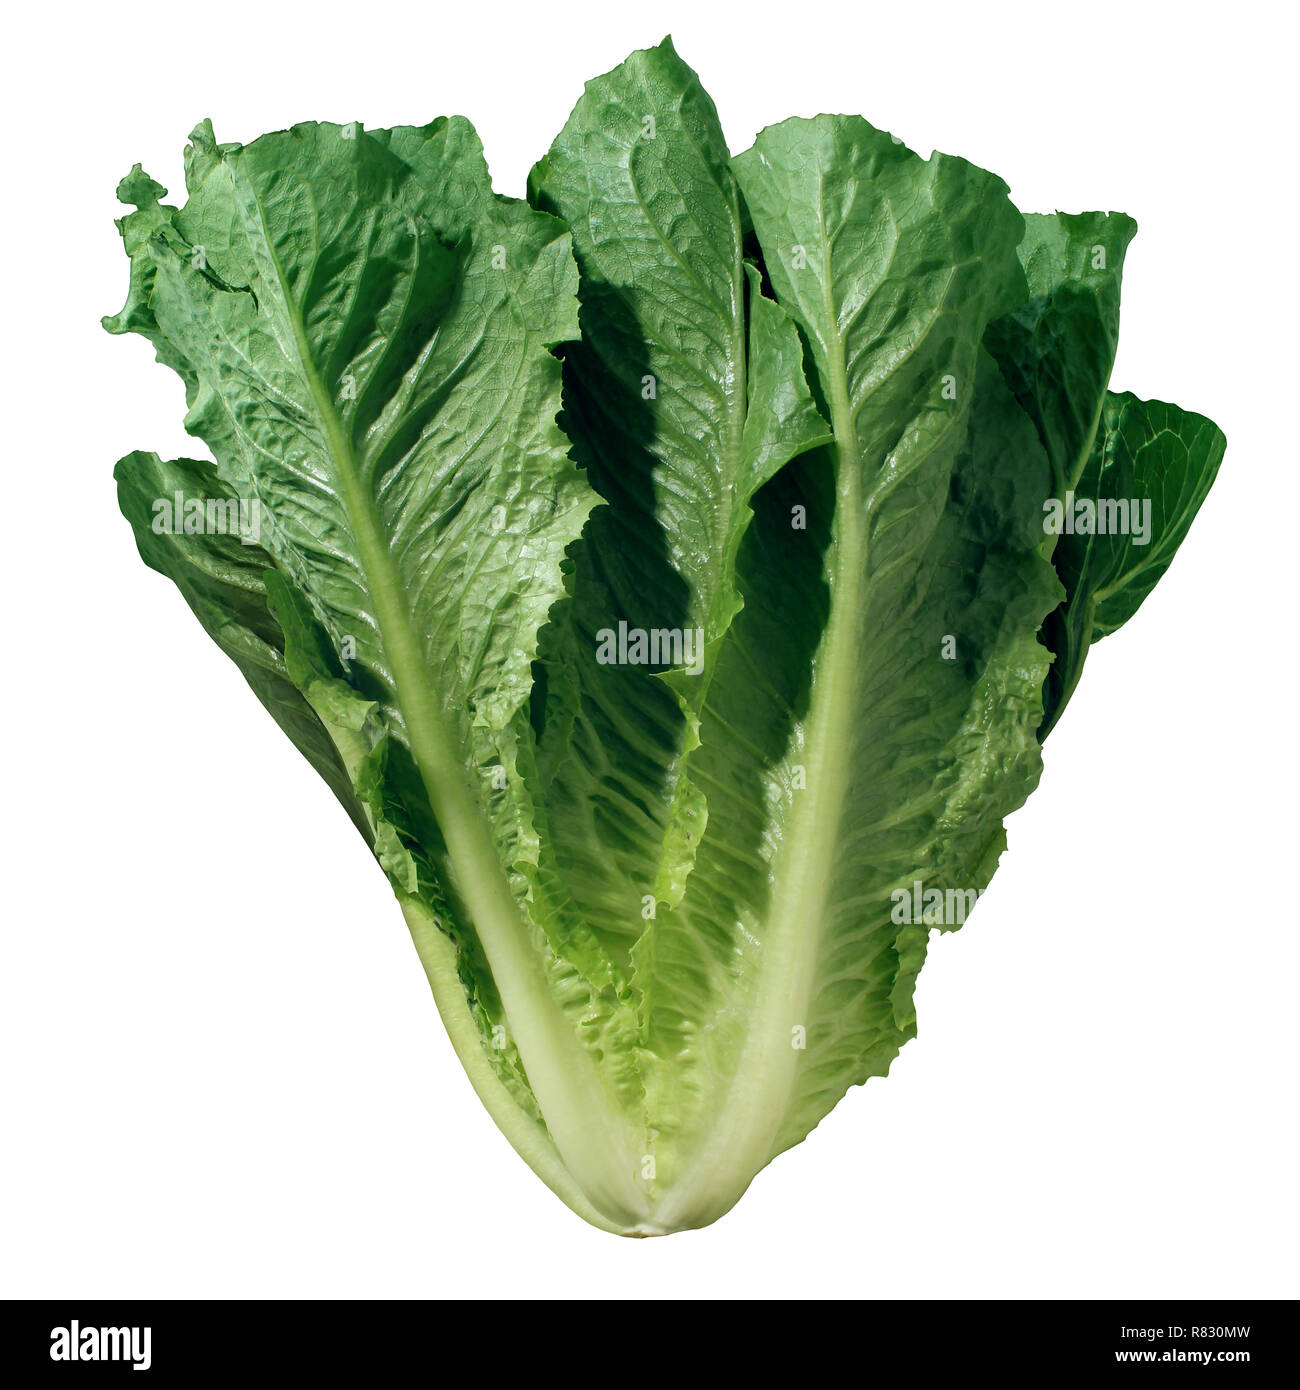 Romaine lettuce isolated on white background as a fresh green leafy salad vegetable. Stock Photo